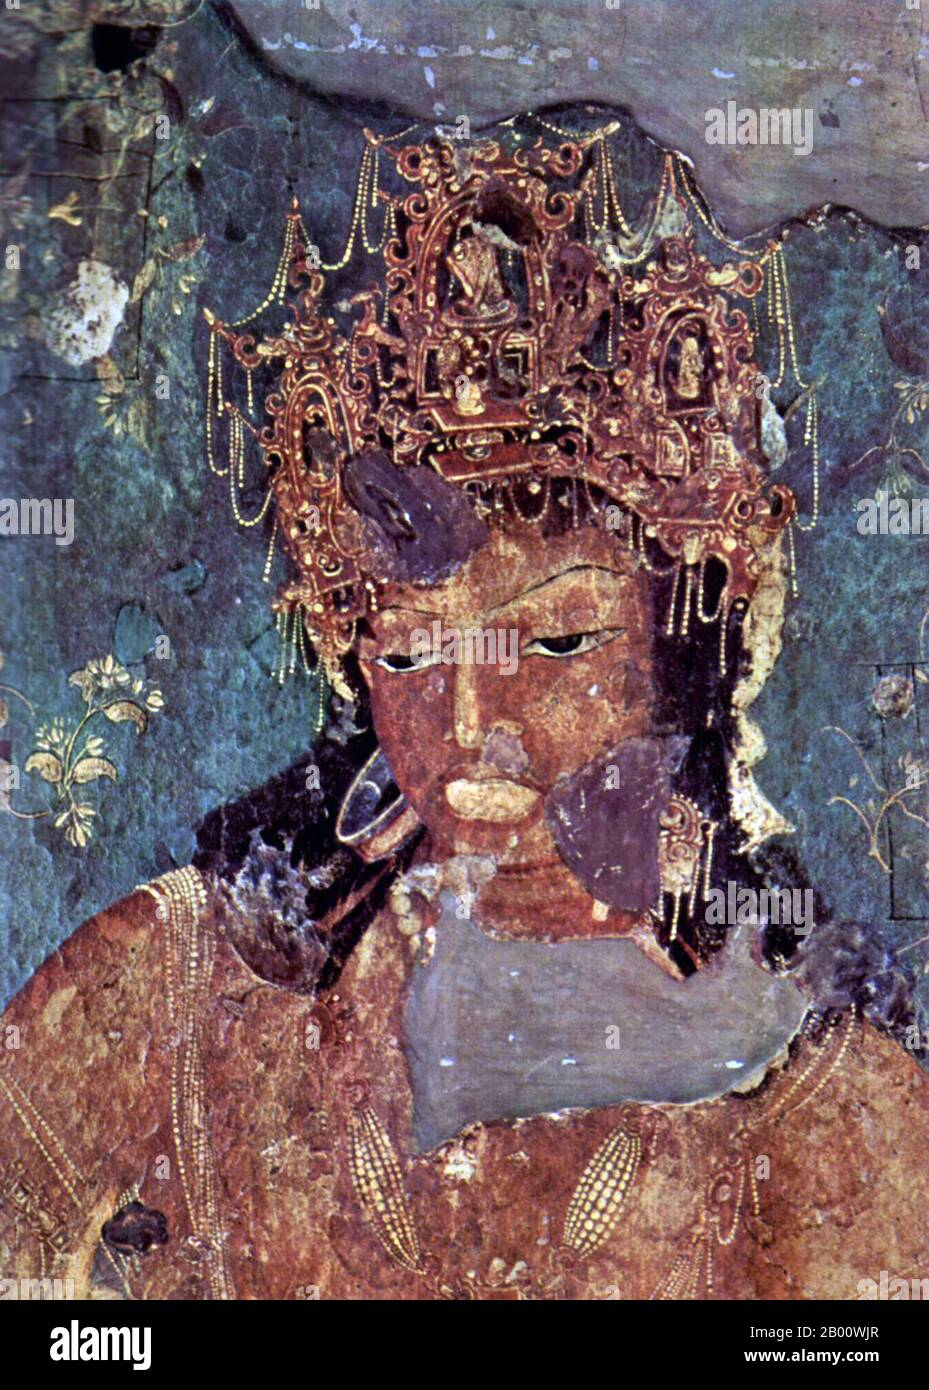 India: Detail of a Bodhisattva, Ajanta Caves.  The Ajanta Caves in Maharashtra, India are 31 rock-cut cave monuments which date from the 2nd century BCE. The caves include paintings and sculptures considered to be masterpieces of both Buddhist religious art (which depict the Jataka tales) as well as frescos which are reminiscent of the Sigiriya paintings in Sri Lanka.  The caves were built in two phases starting around 200 BCE, with the second group of caves built around 600 CE. Since 1983, the Ajanta Caves have been a UNESCO World Heritage Site. Stock Photo